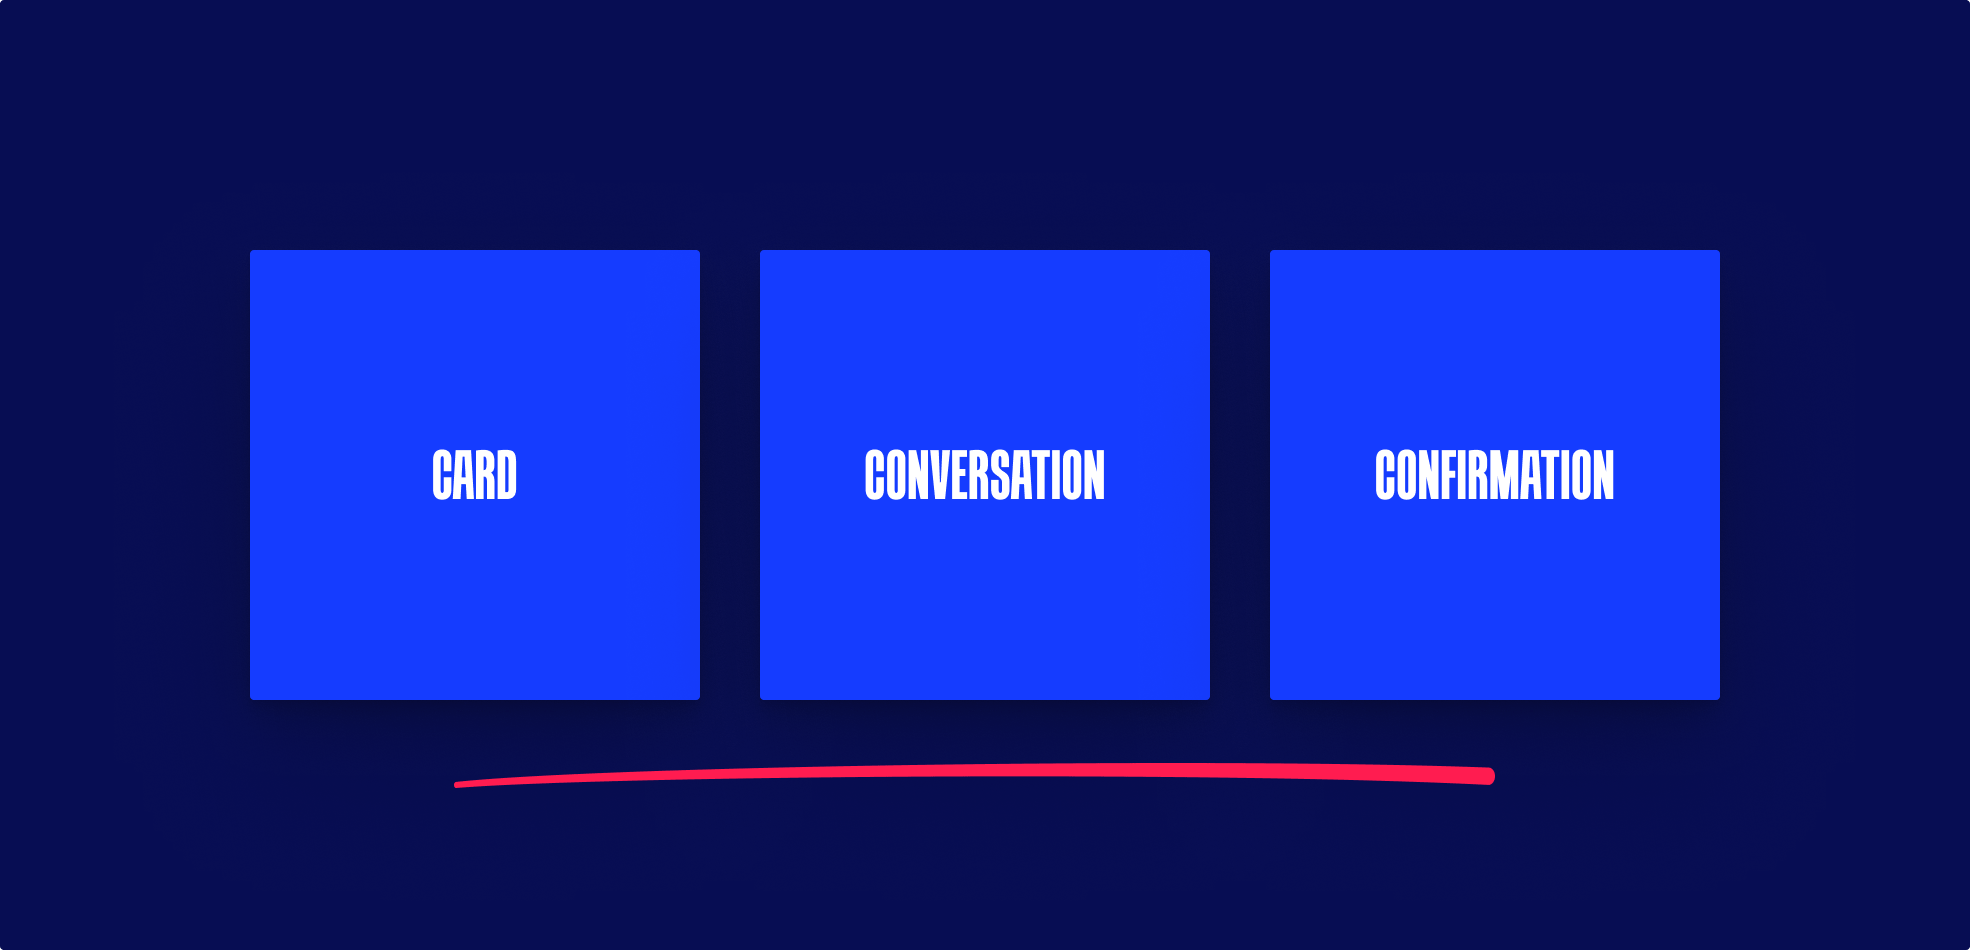 The formula for core components of a user story called the "three C's": card, conversation, and confirmation.